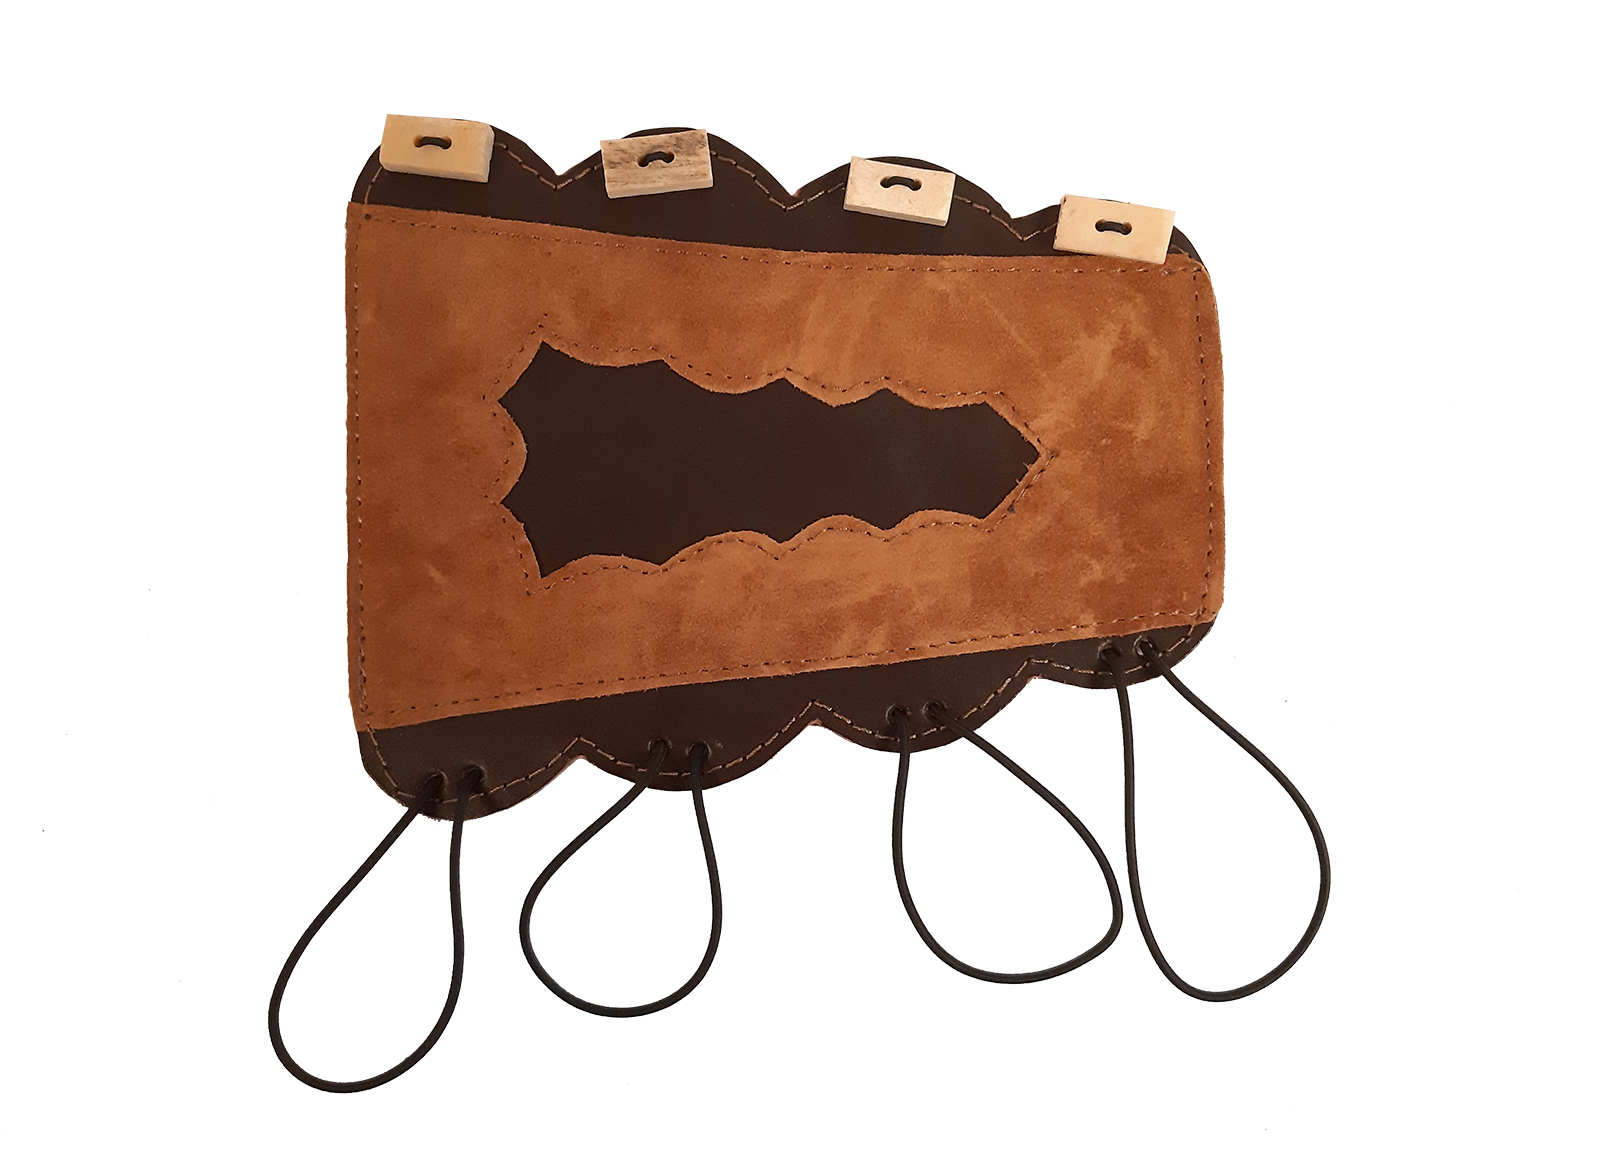 ALPEN ARCHERY TRADITIONAL ARMGUARD IN BROWN SUEDE LEATHER